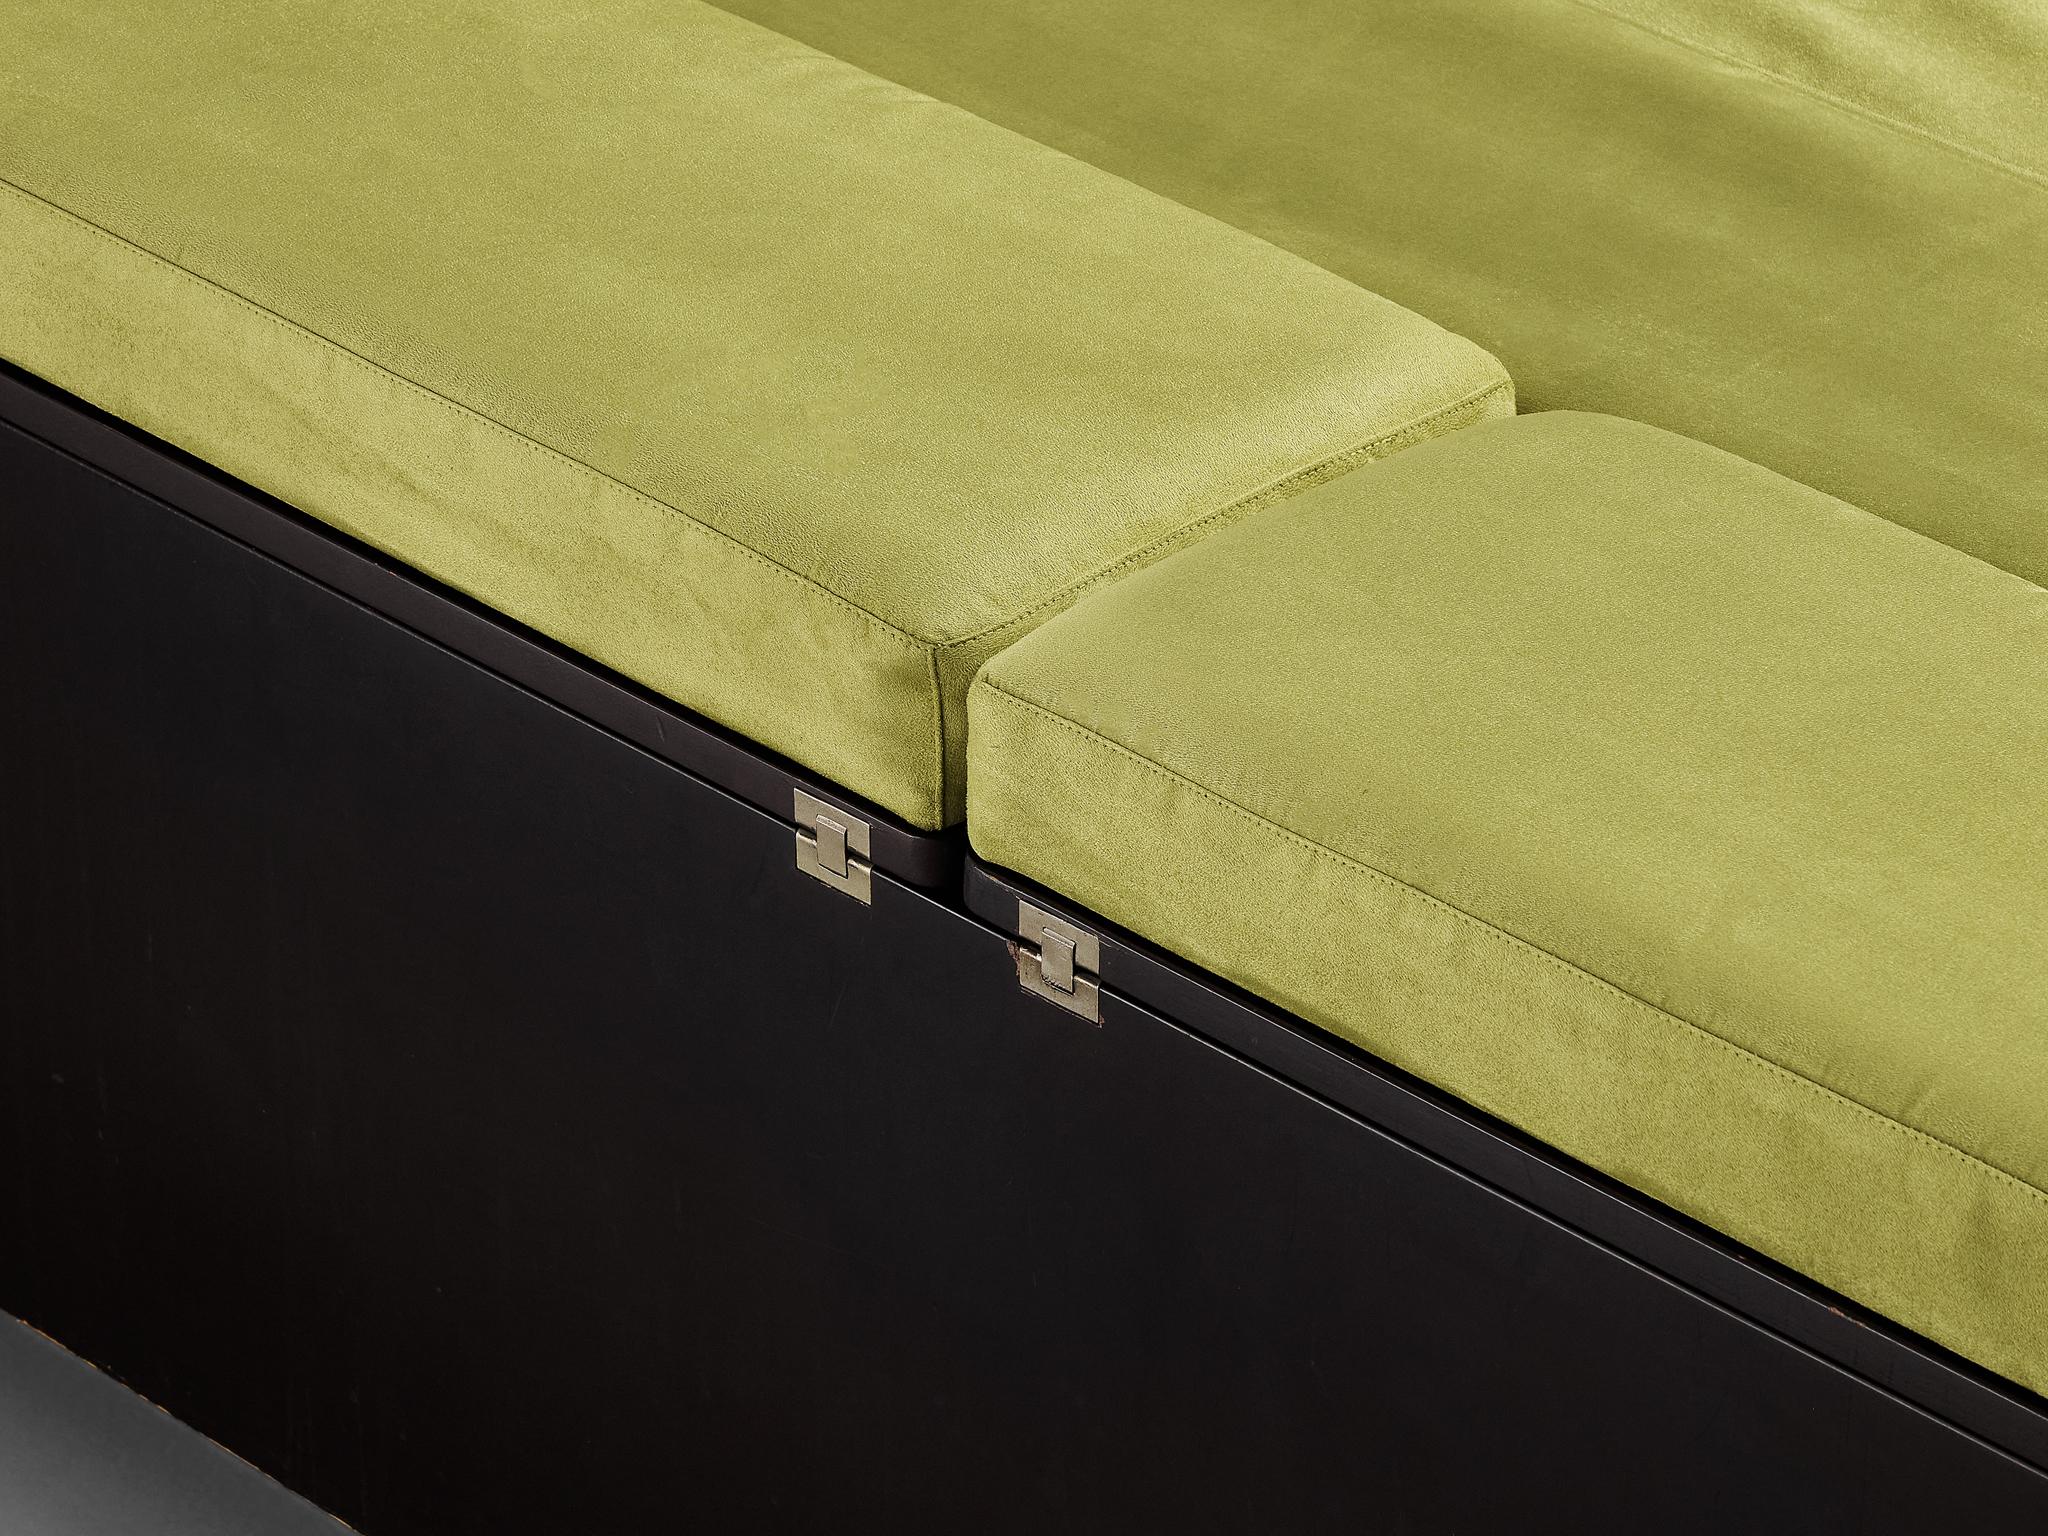 Luciano Bertoncini for Cjfra 'Zattera' Bed in Alcantara and Lacquered Wood